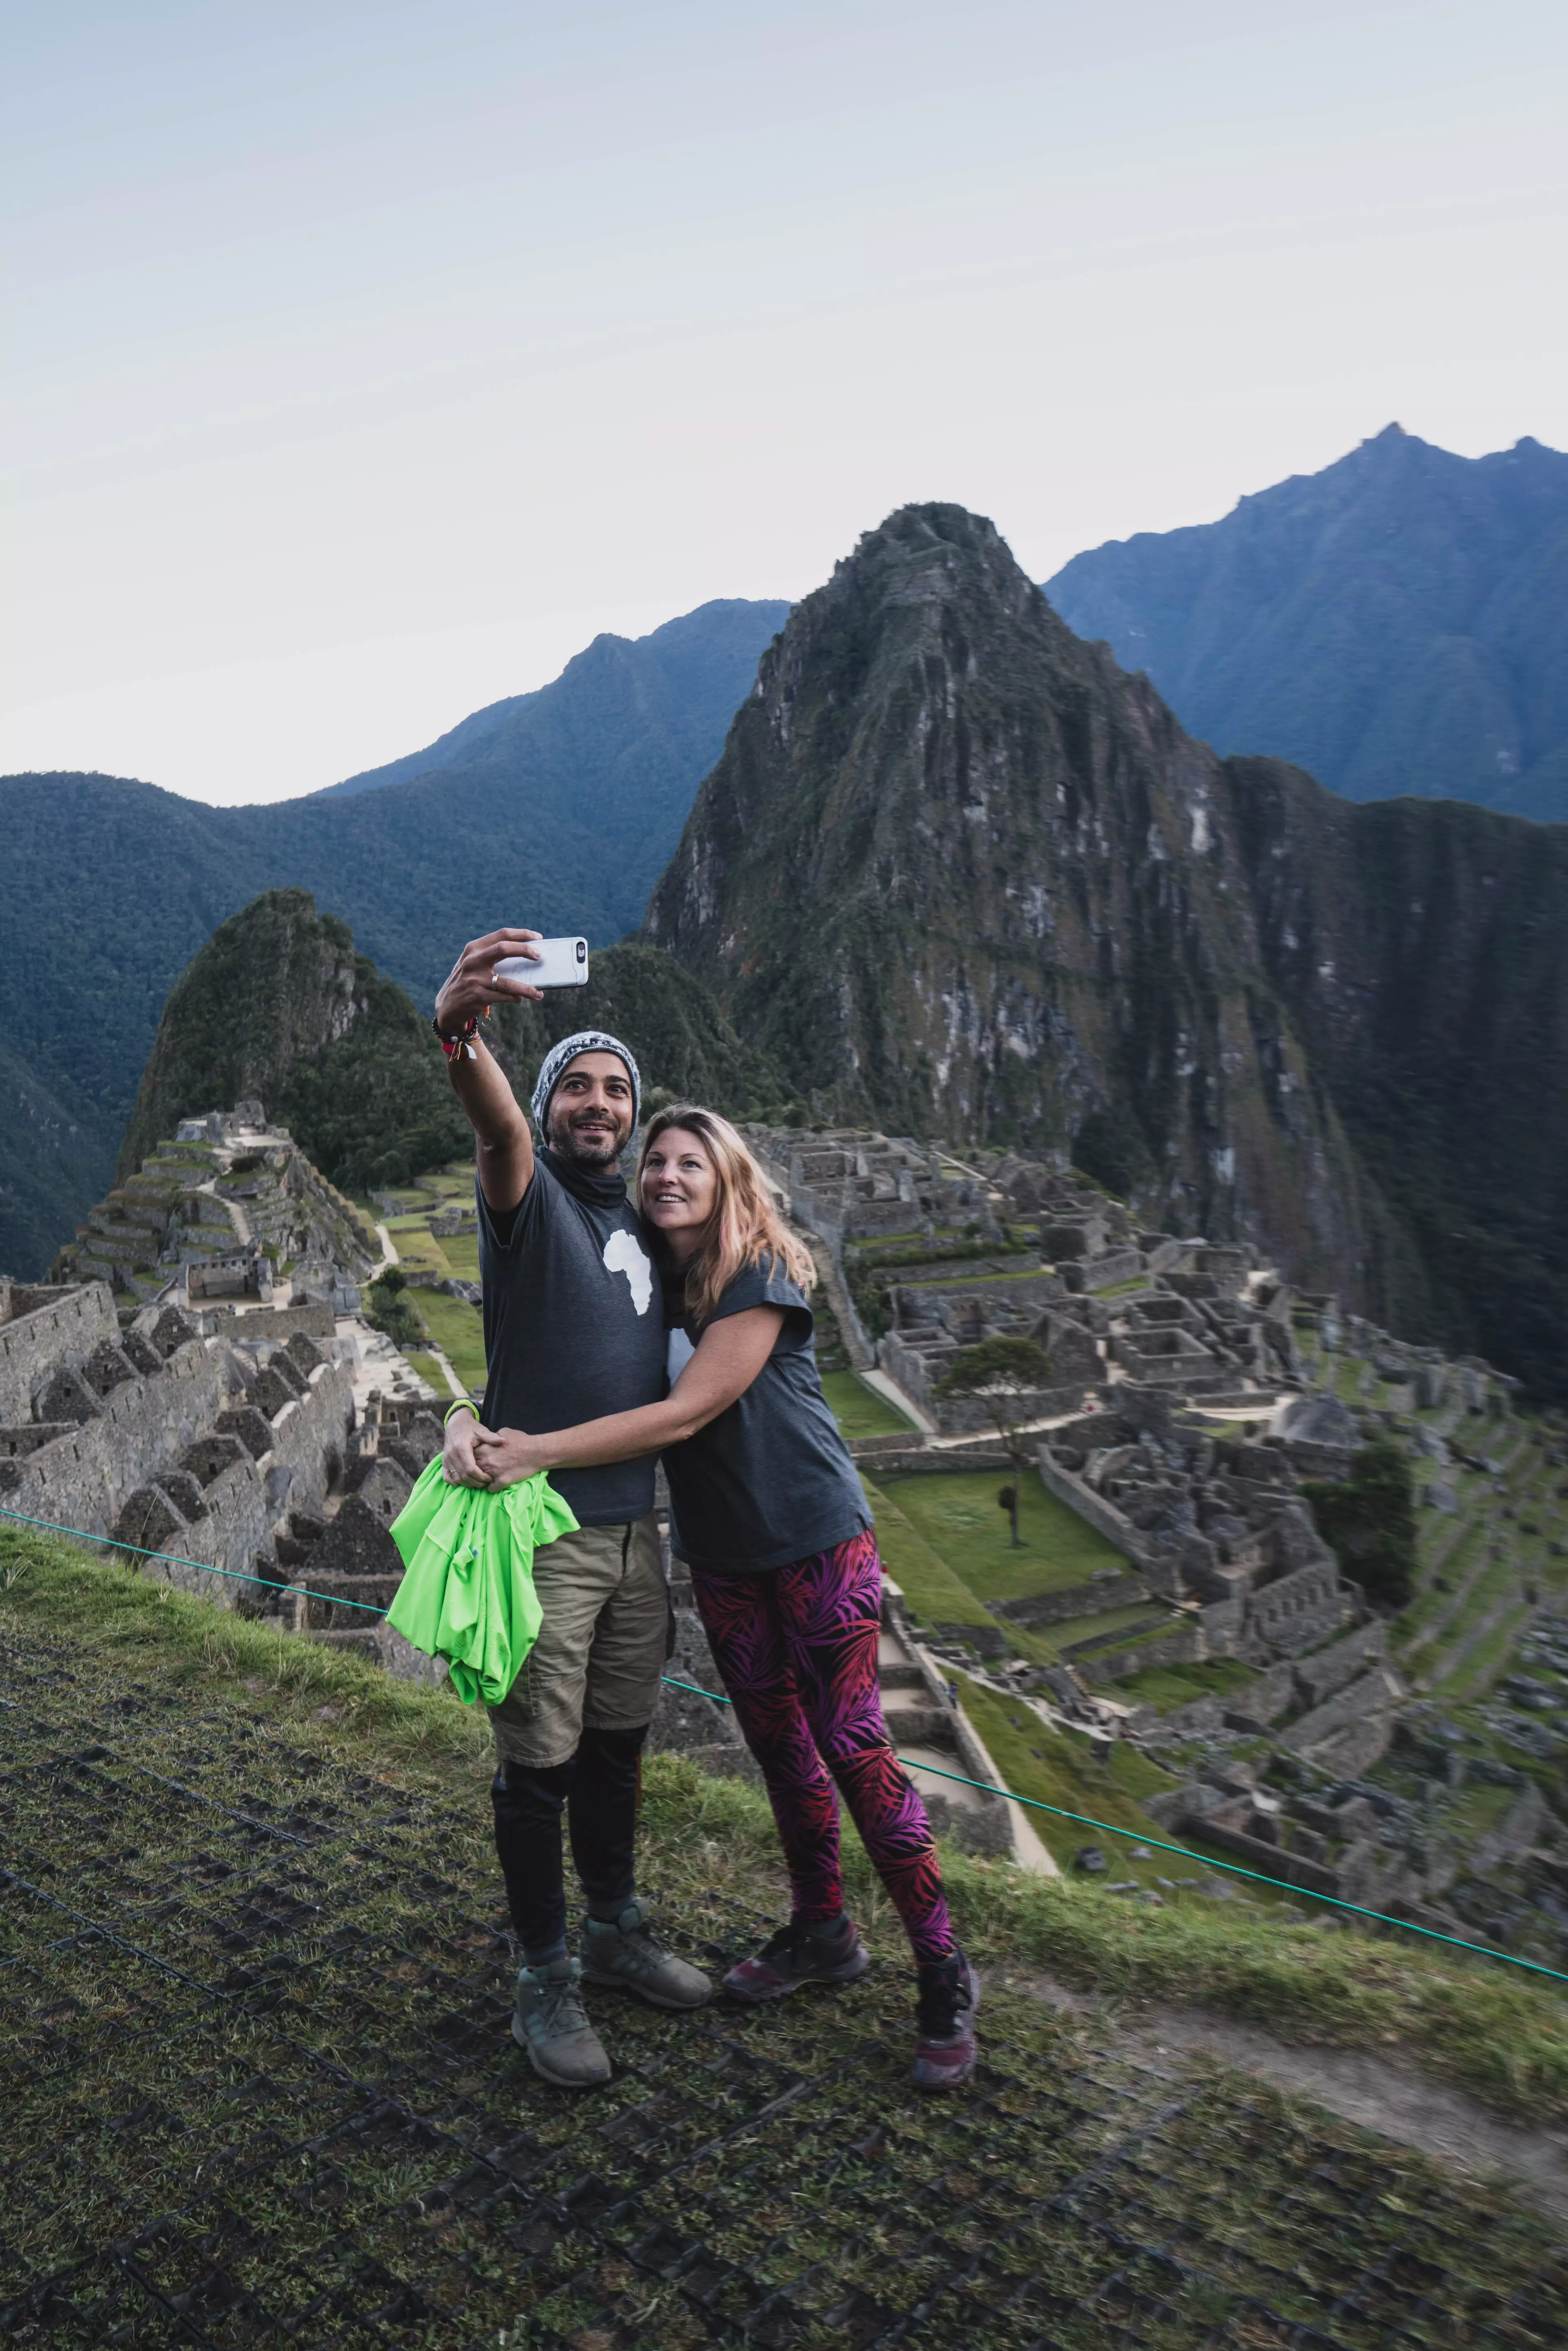 One of their highlights was visiting Machu Picchu.